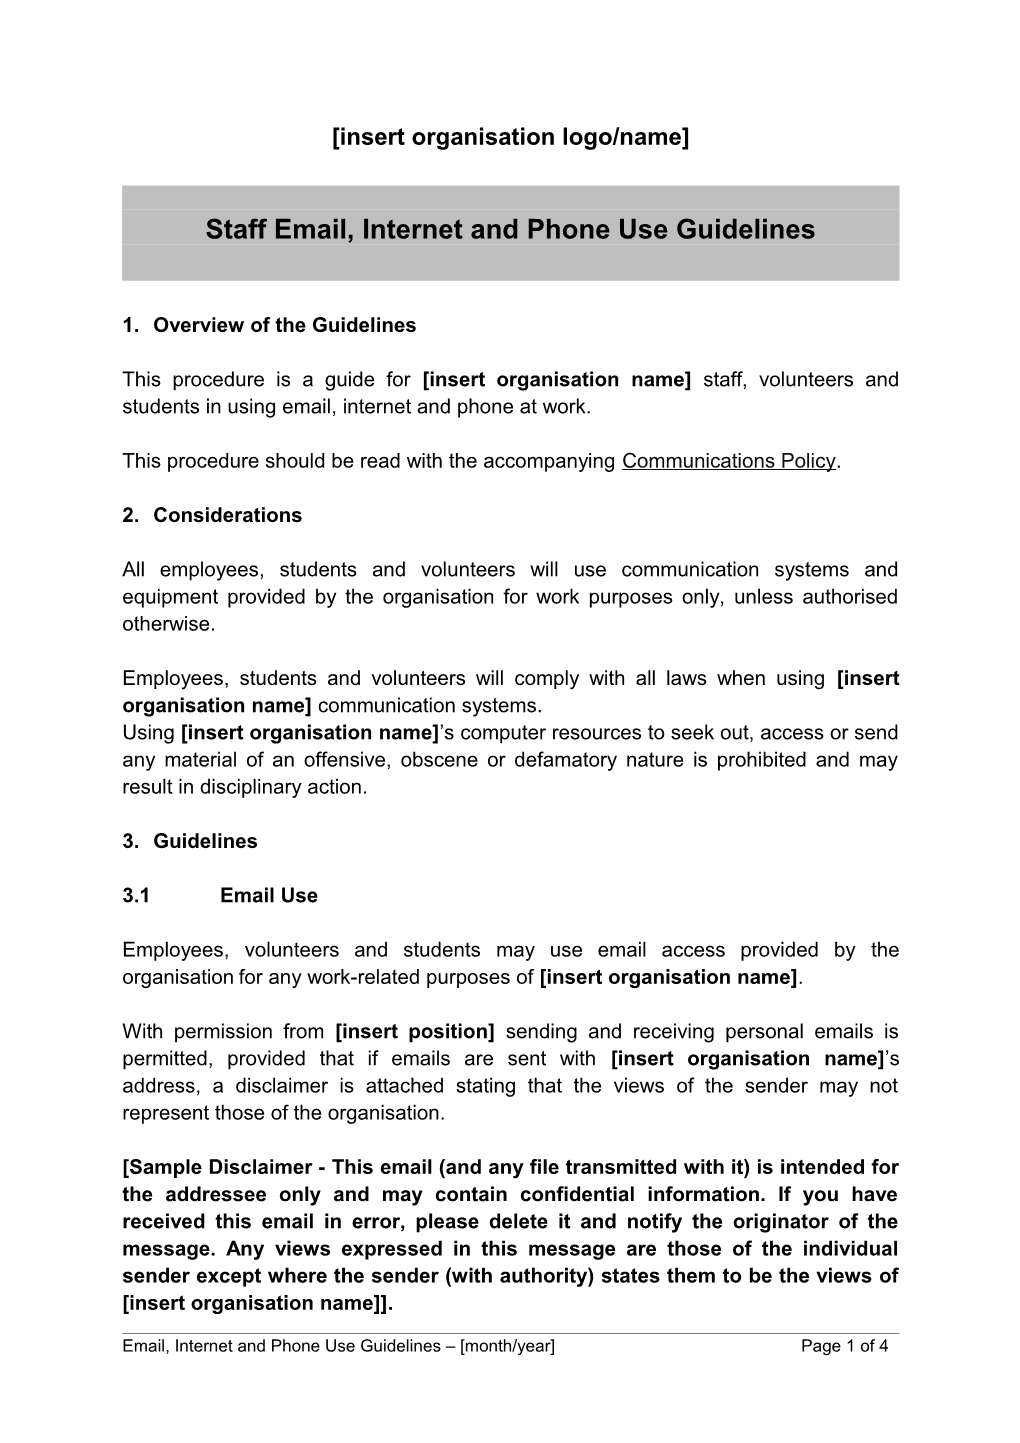 Staff Email, Internet and Phone Use Guidelines